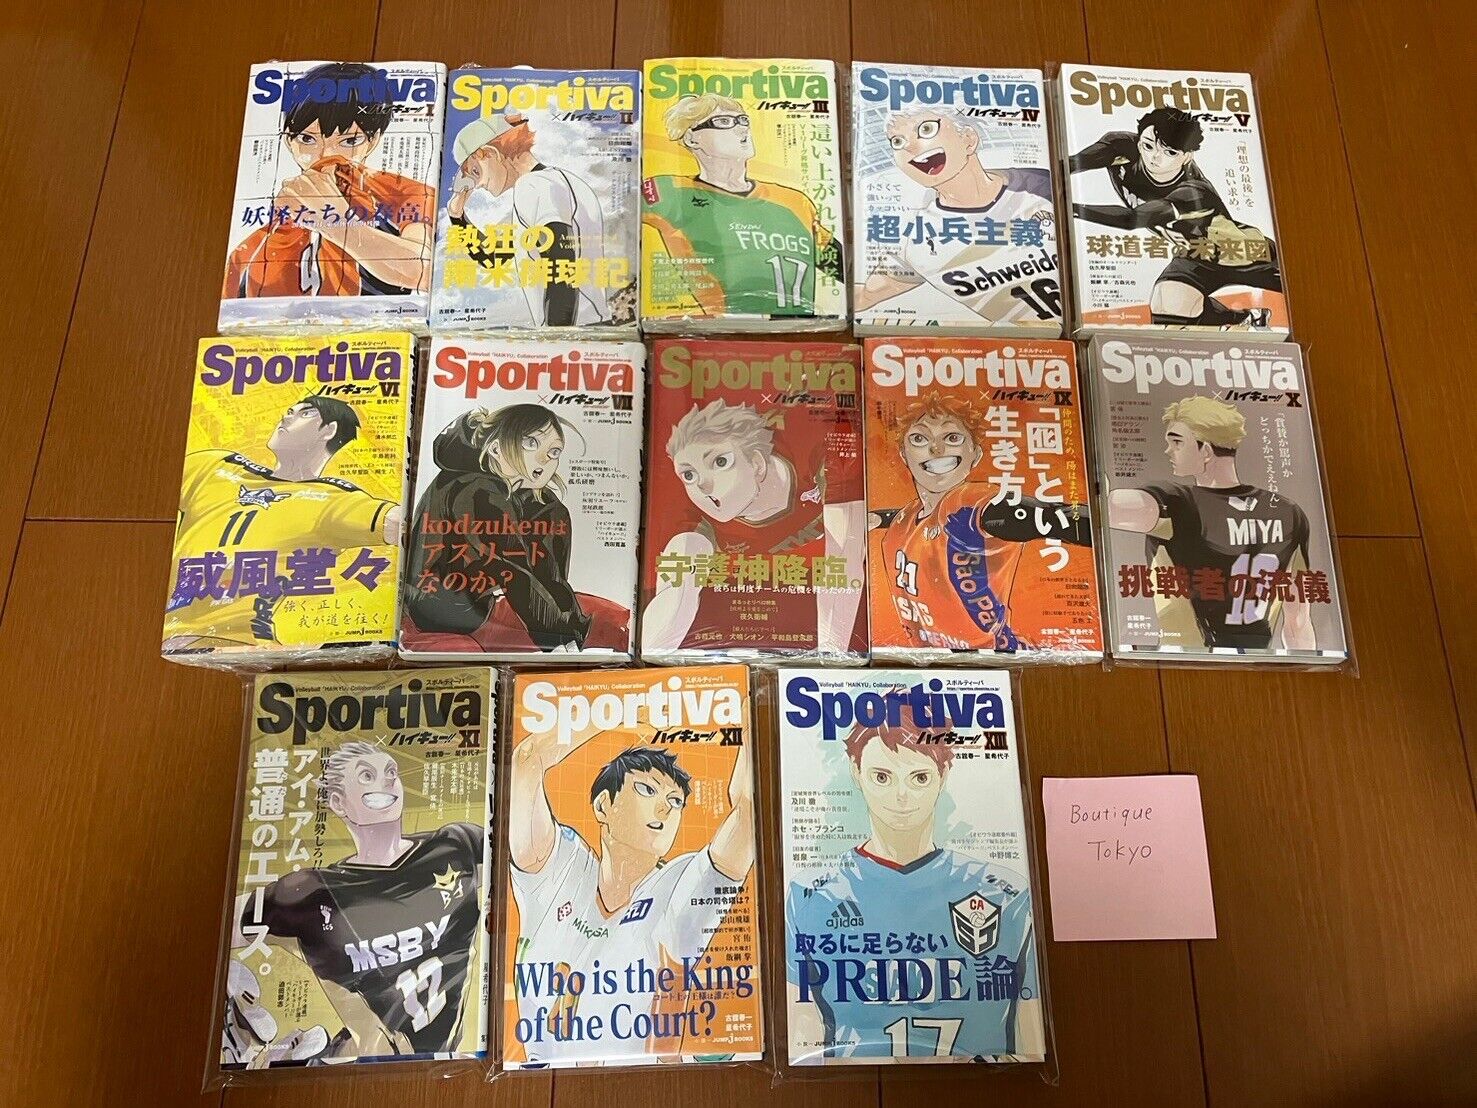 Haikyuu Novel Limited sportiva version complete set 13 &13 Book Covers Included